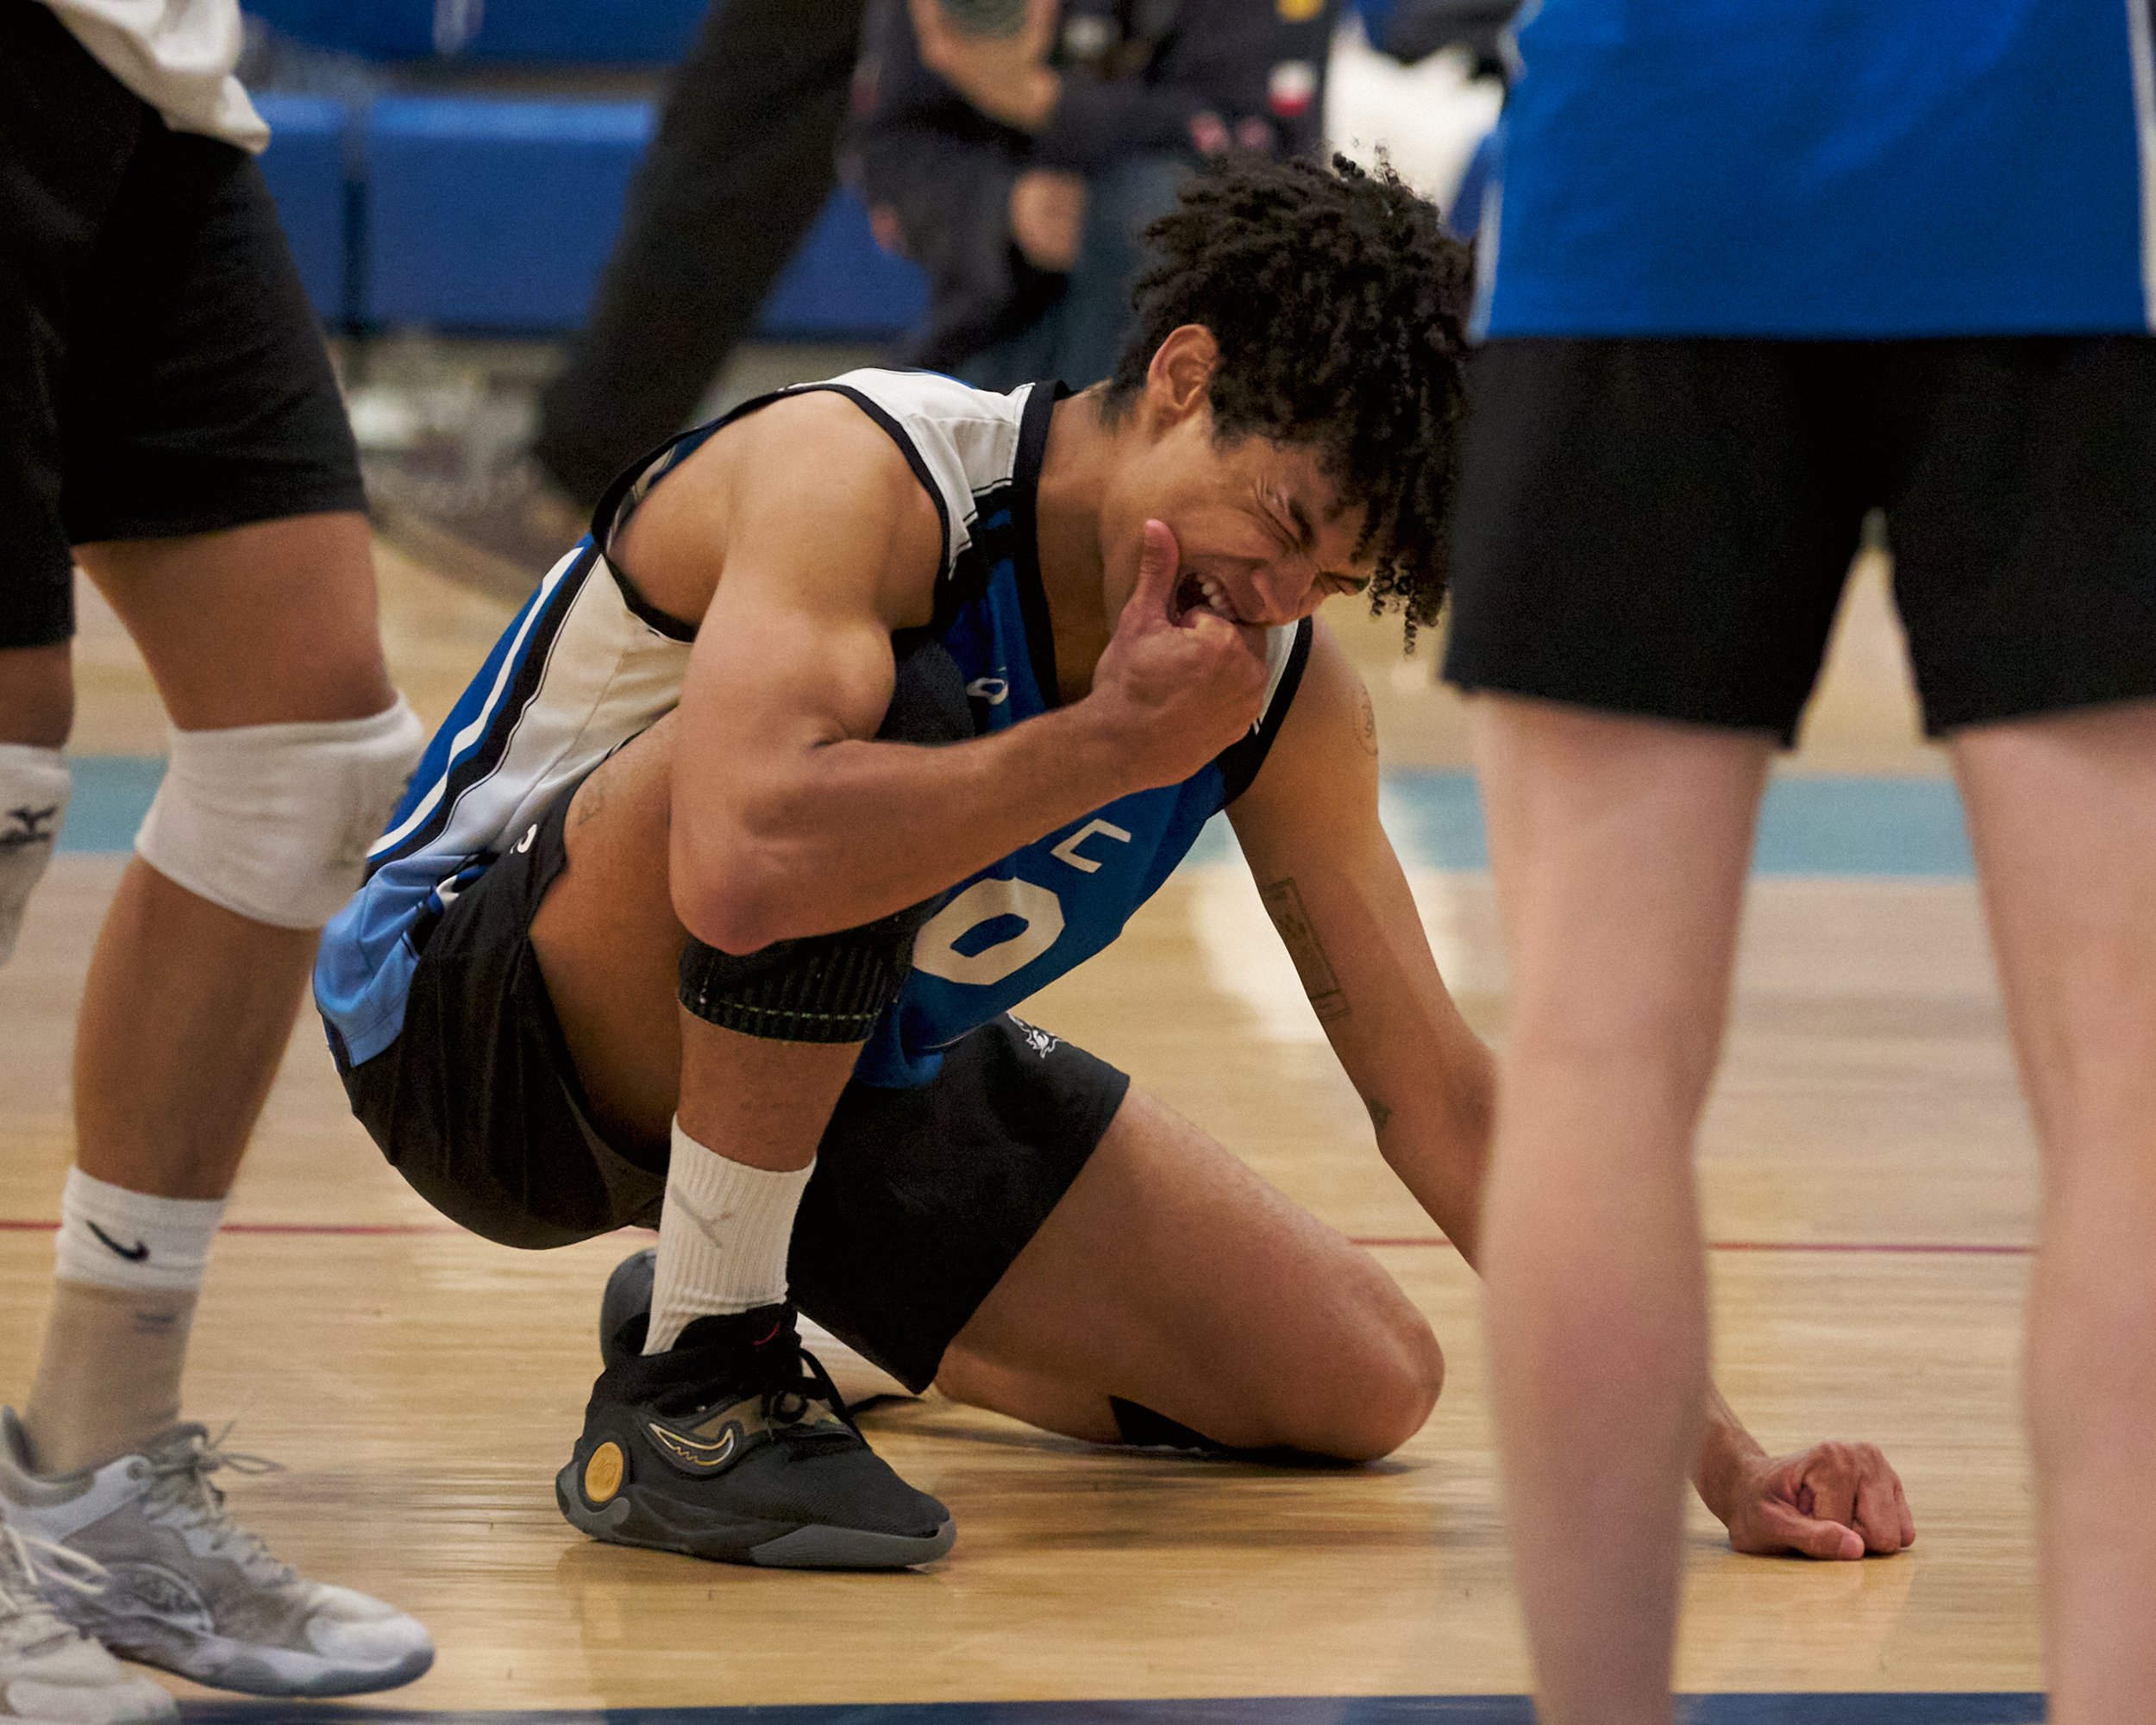  Santa Monica College Corsairs' Nate Davis reacts to his error during the men's volleyball match against the Irvine Valley College Lasers on Friday, Feb. 24, 2023, at Corsair Gym in Santa Monica, Calif. The Corsairs Lost 3-1. (Nicholas McCall | The C